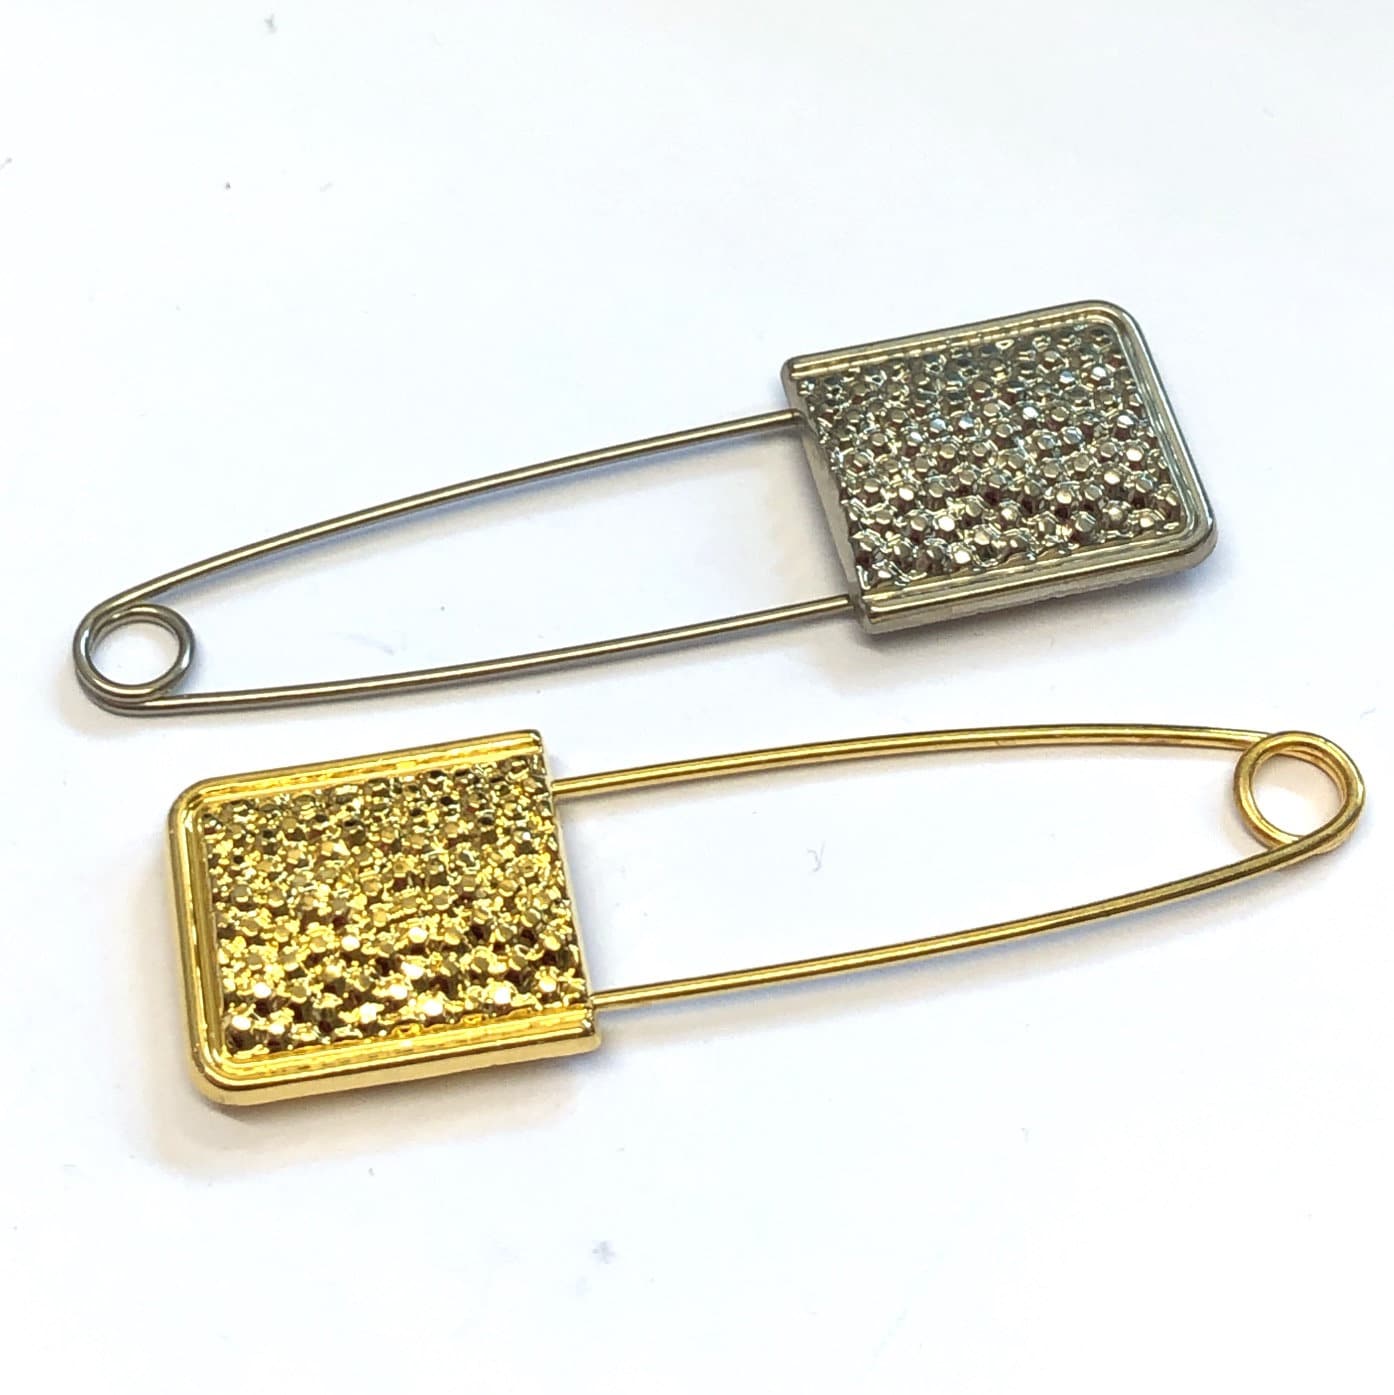 The Sandal Hijab Pin Gold Published by UNS Fine Crafts available